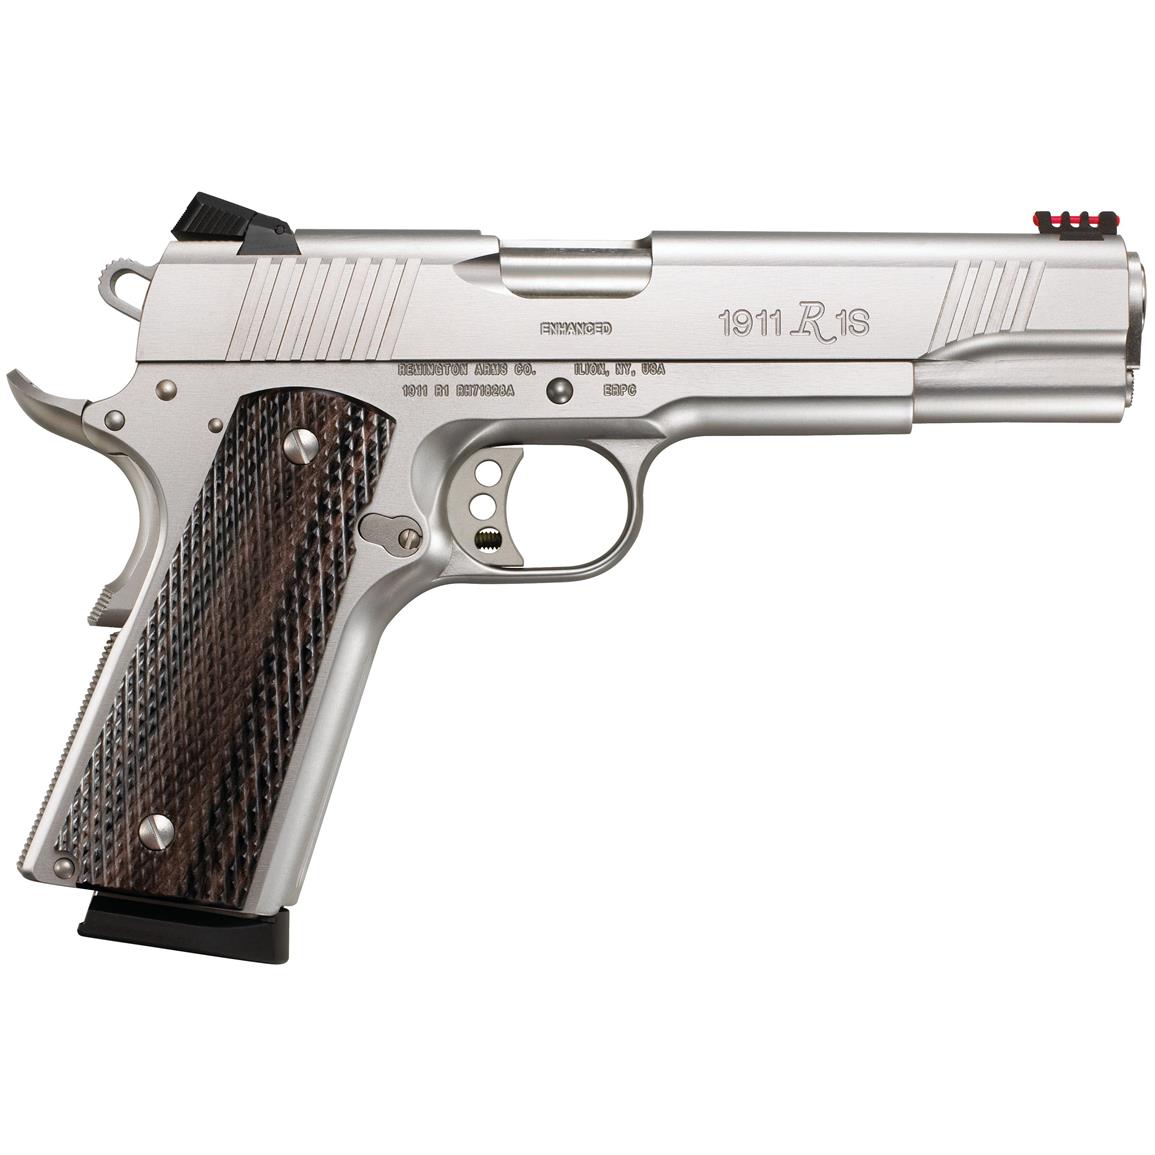 Remington Model 1911 R1 Enhanced, Semi-automatic, .45 ACP, Stainless Stainless Steel 1911 45 Acp